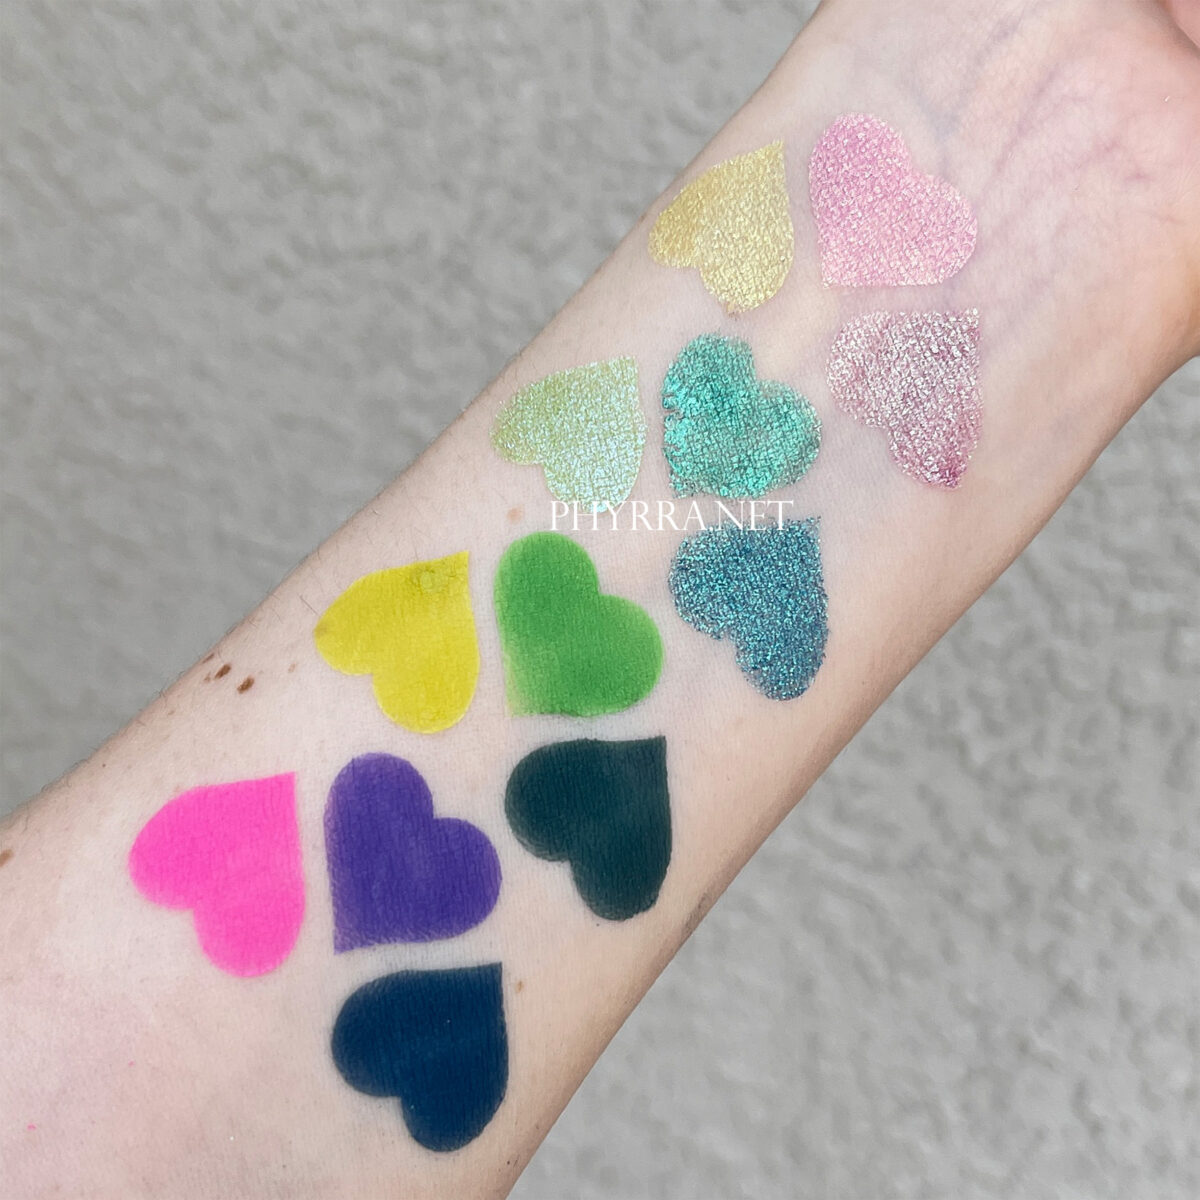 Lethal 1UP Palette swatches on fair skin in indirect sunlight outdoors